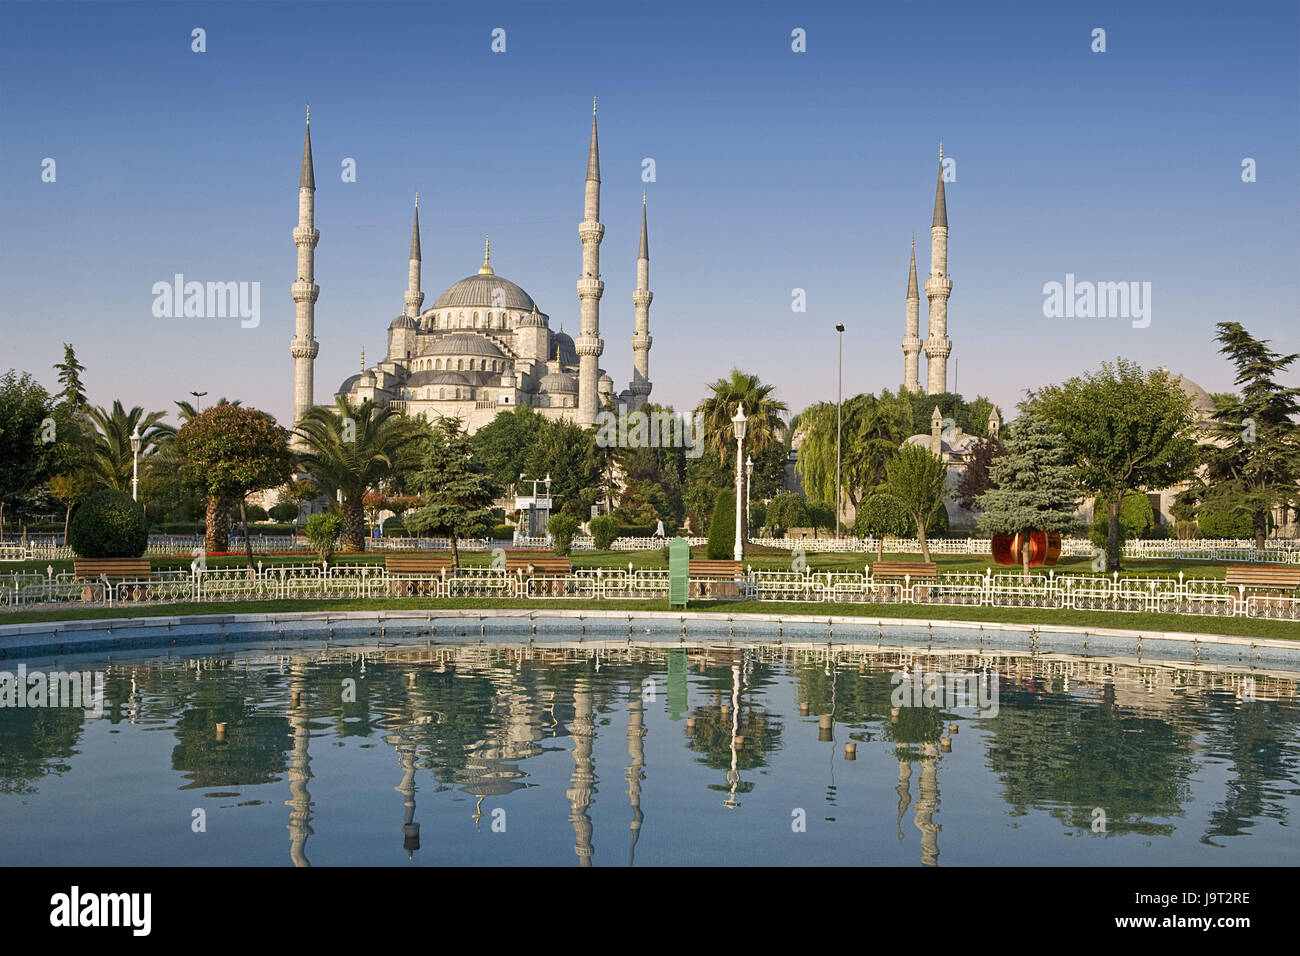 Turkey,Istanbul,sultan Ahmet Camii,'blue mosque',mirroring,water surface,town,city,metropolis,port,culture,faith,religion,Islam,structure,historically,architecture,church,sacred construction,Sultan-Ahmet-Camii,sultan's Ahmed's mosque,mosque,domed building,towers,landmarks,places of interest,minarets,domes,outside,deserted,palms,trees,water cymbals,park, Stock Photo